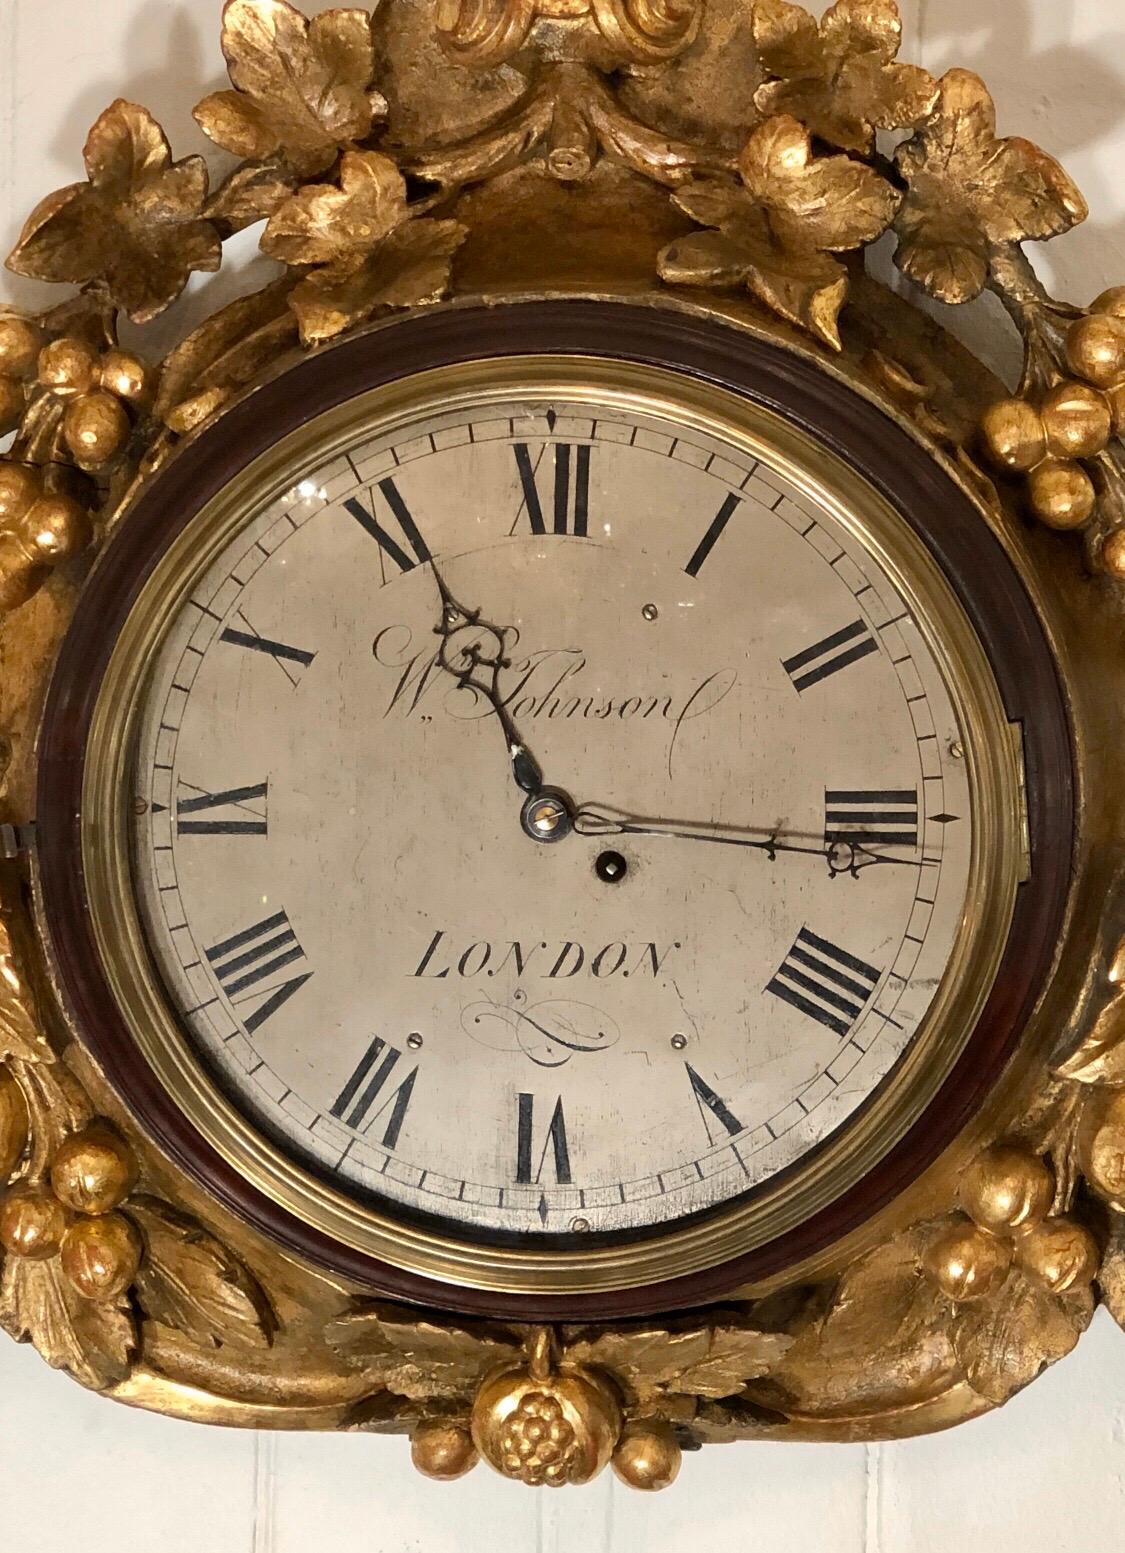 Important English Regency giltwood wall mounted clock having mahogany ring holding the convex glass door with molded brass bezel. The twelve inch engraved silvered dial is signed Wm. Johnson, LONDON. The clock hands are blued steel. The clock has an